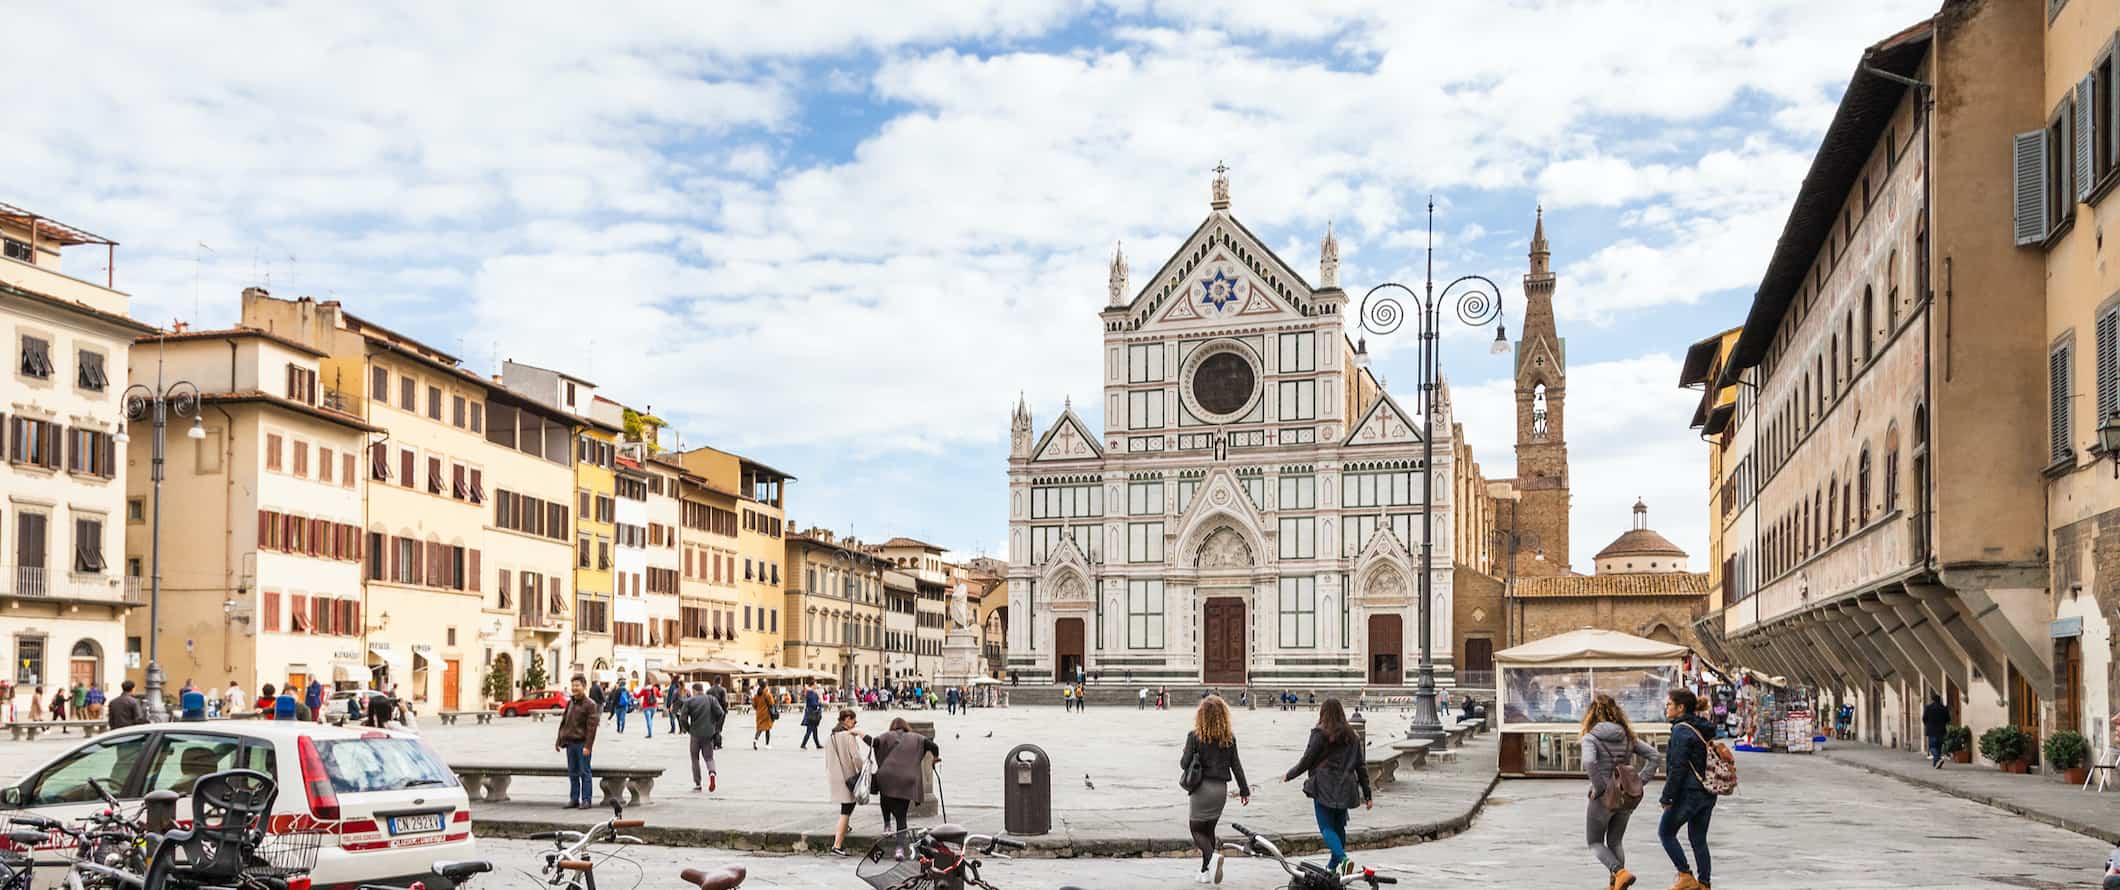 Many bicycles parked in foreground of Piazza Santa Croce in Florence, Italy